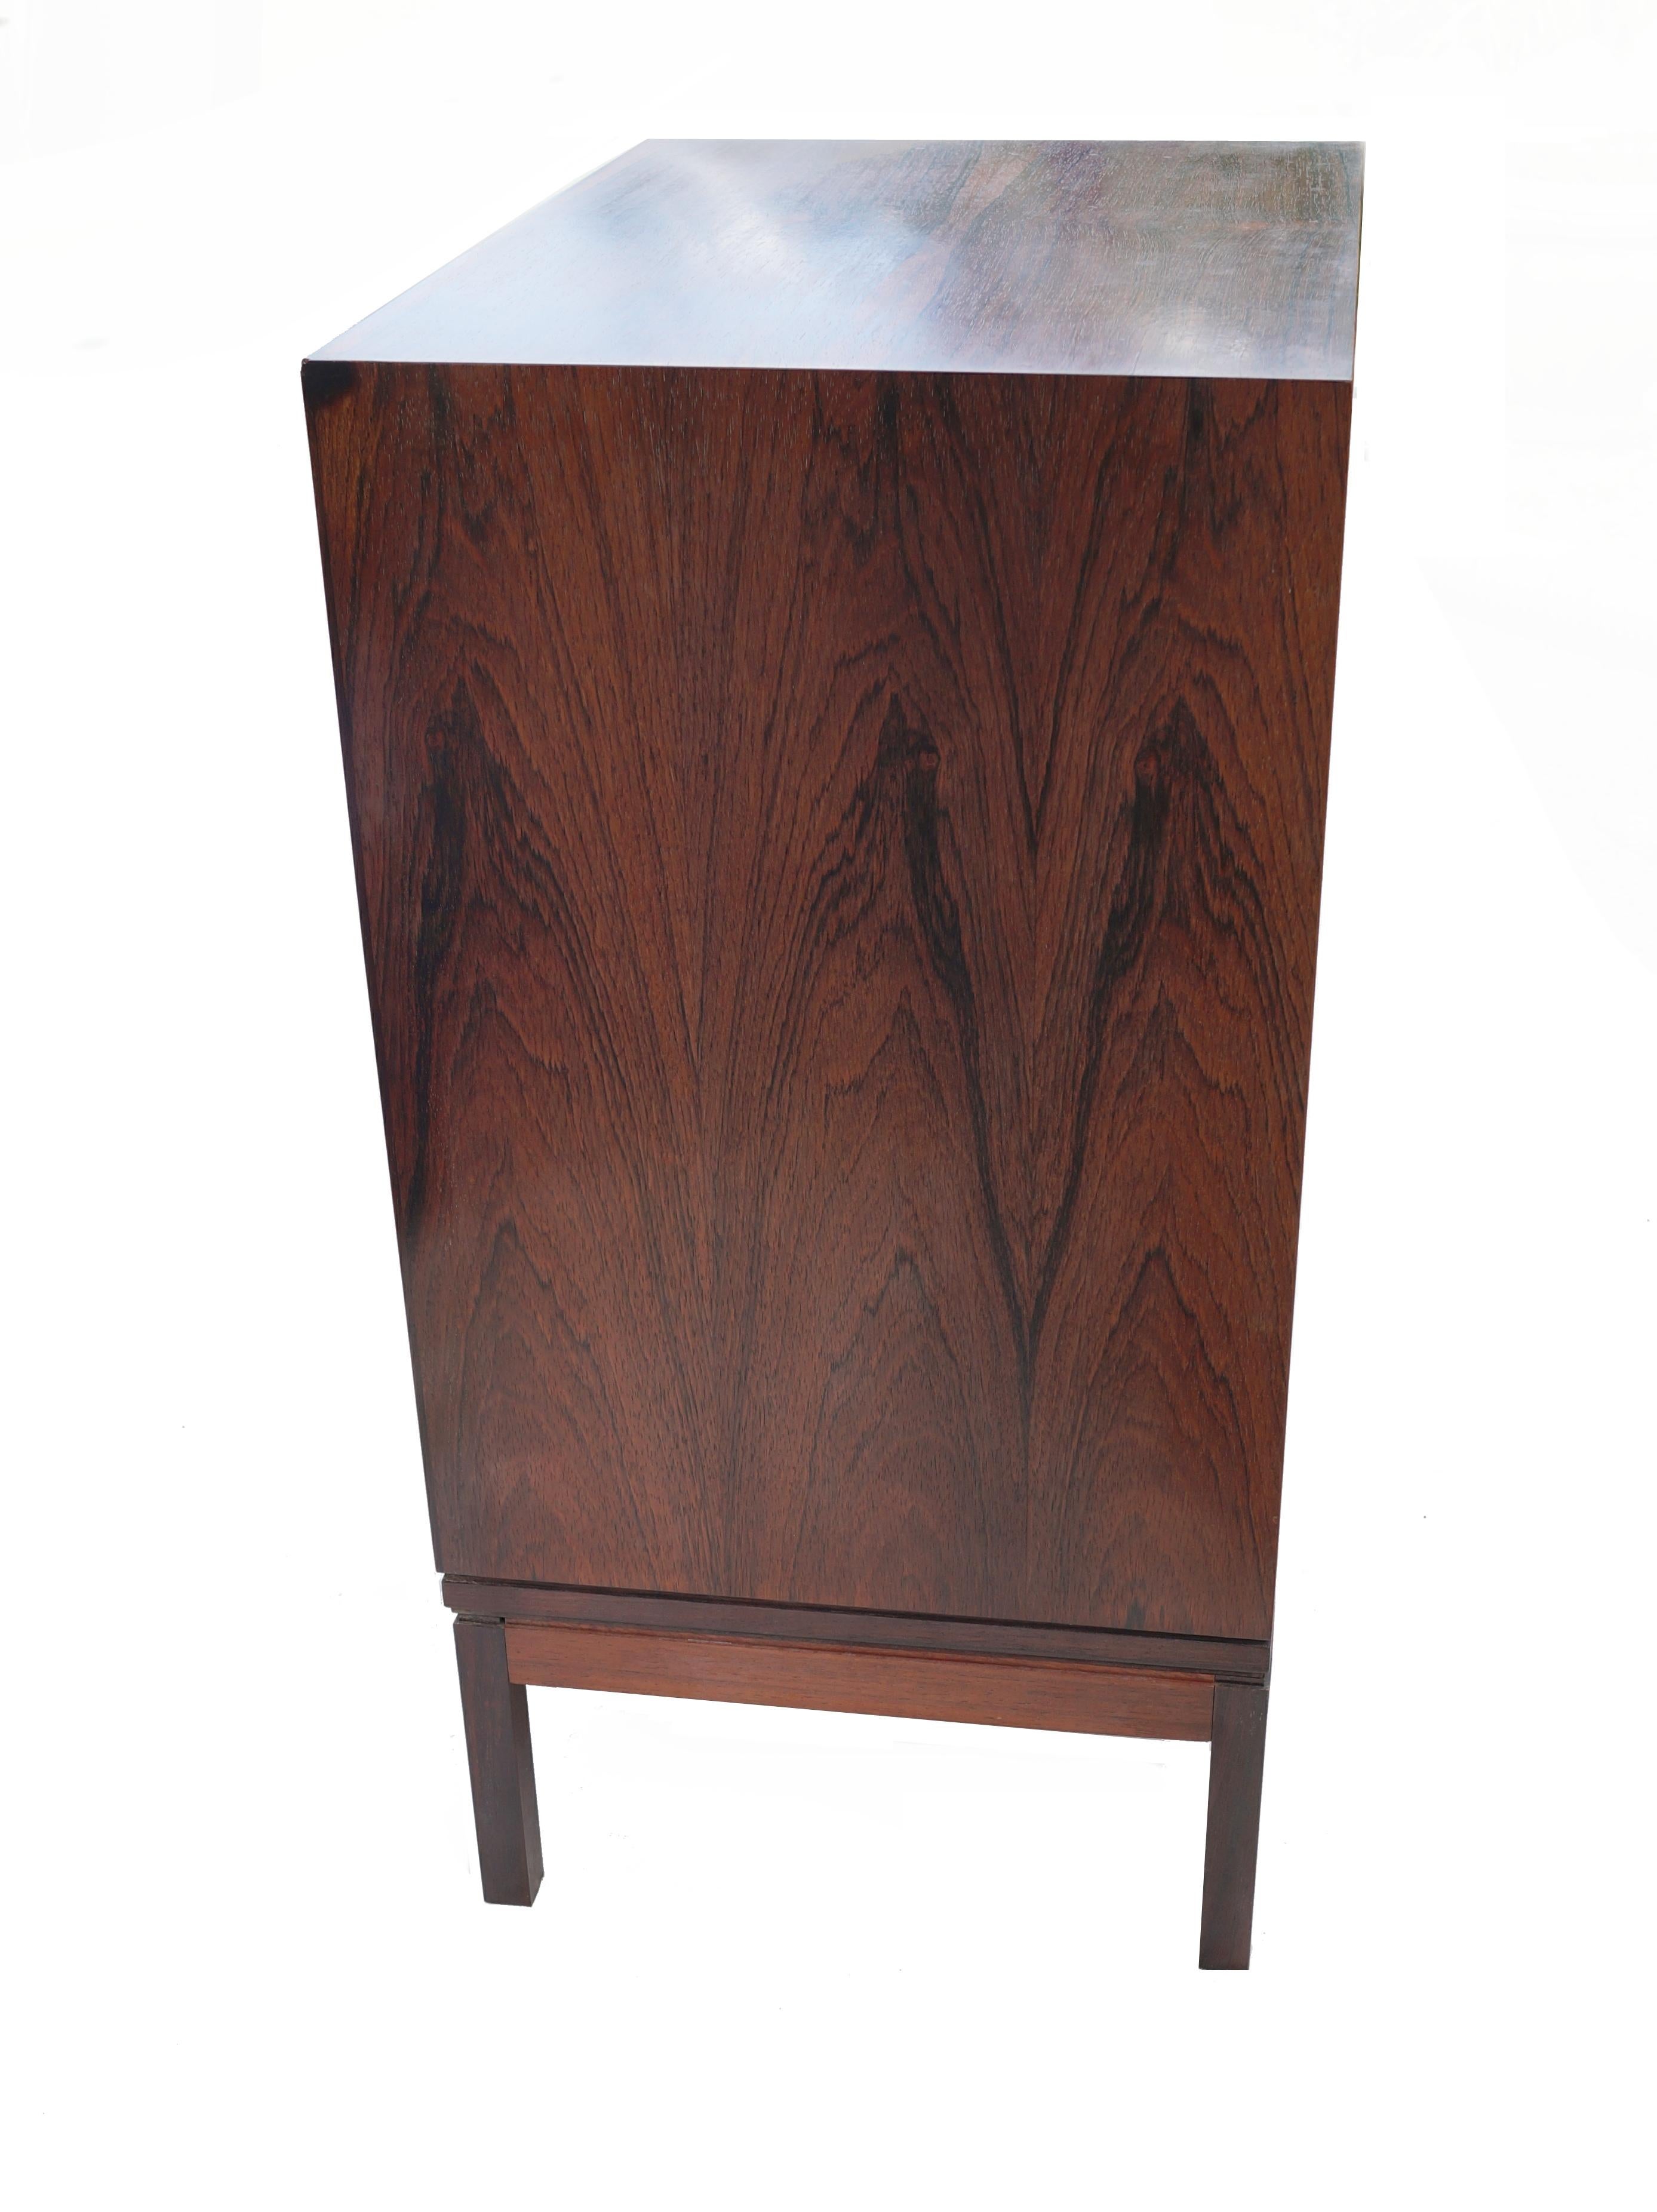 Other Henning Korch Rosewood Danish Modern Jewelry Lingerie Chest Dresser Flat File For Sale